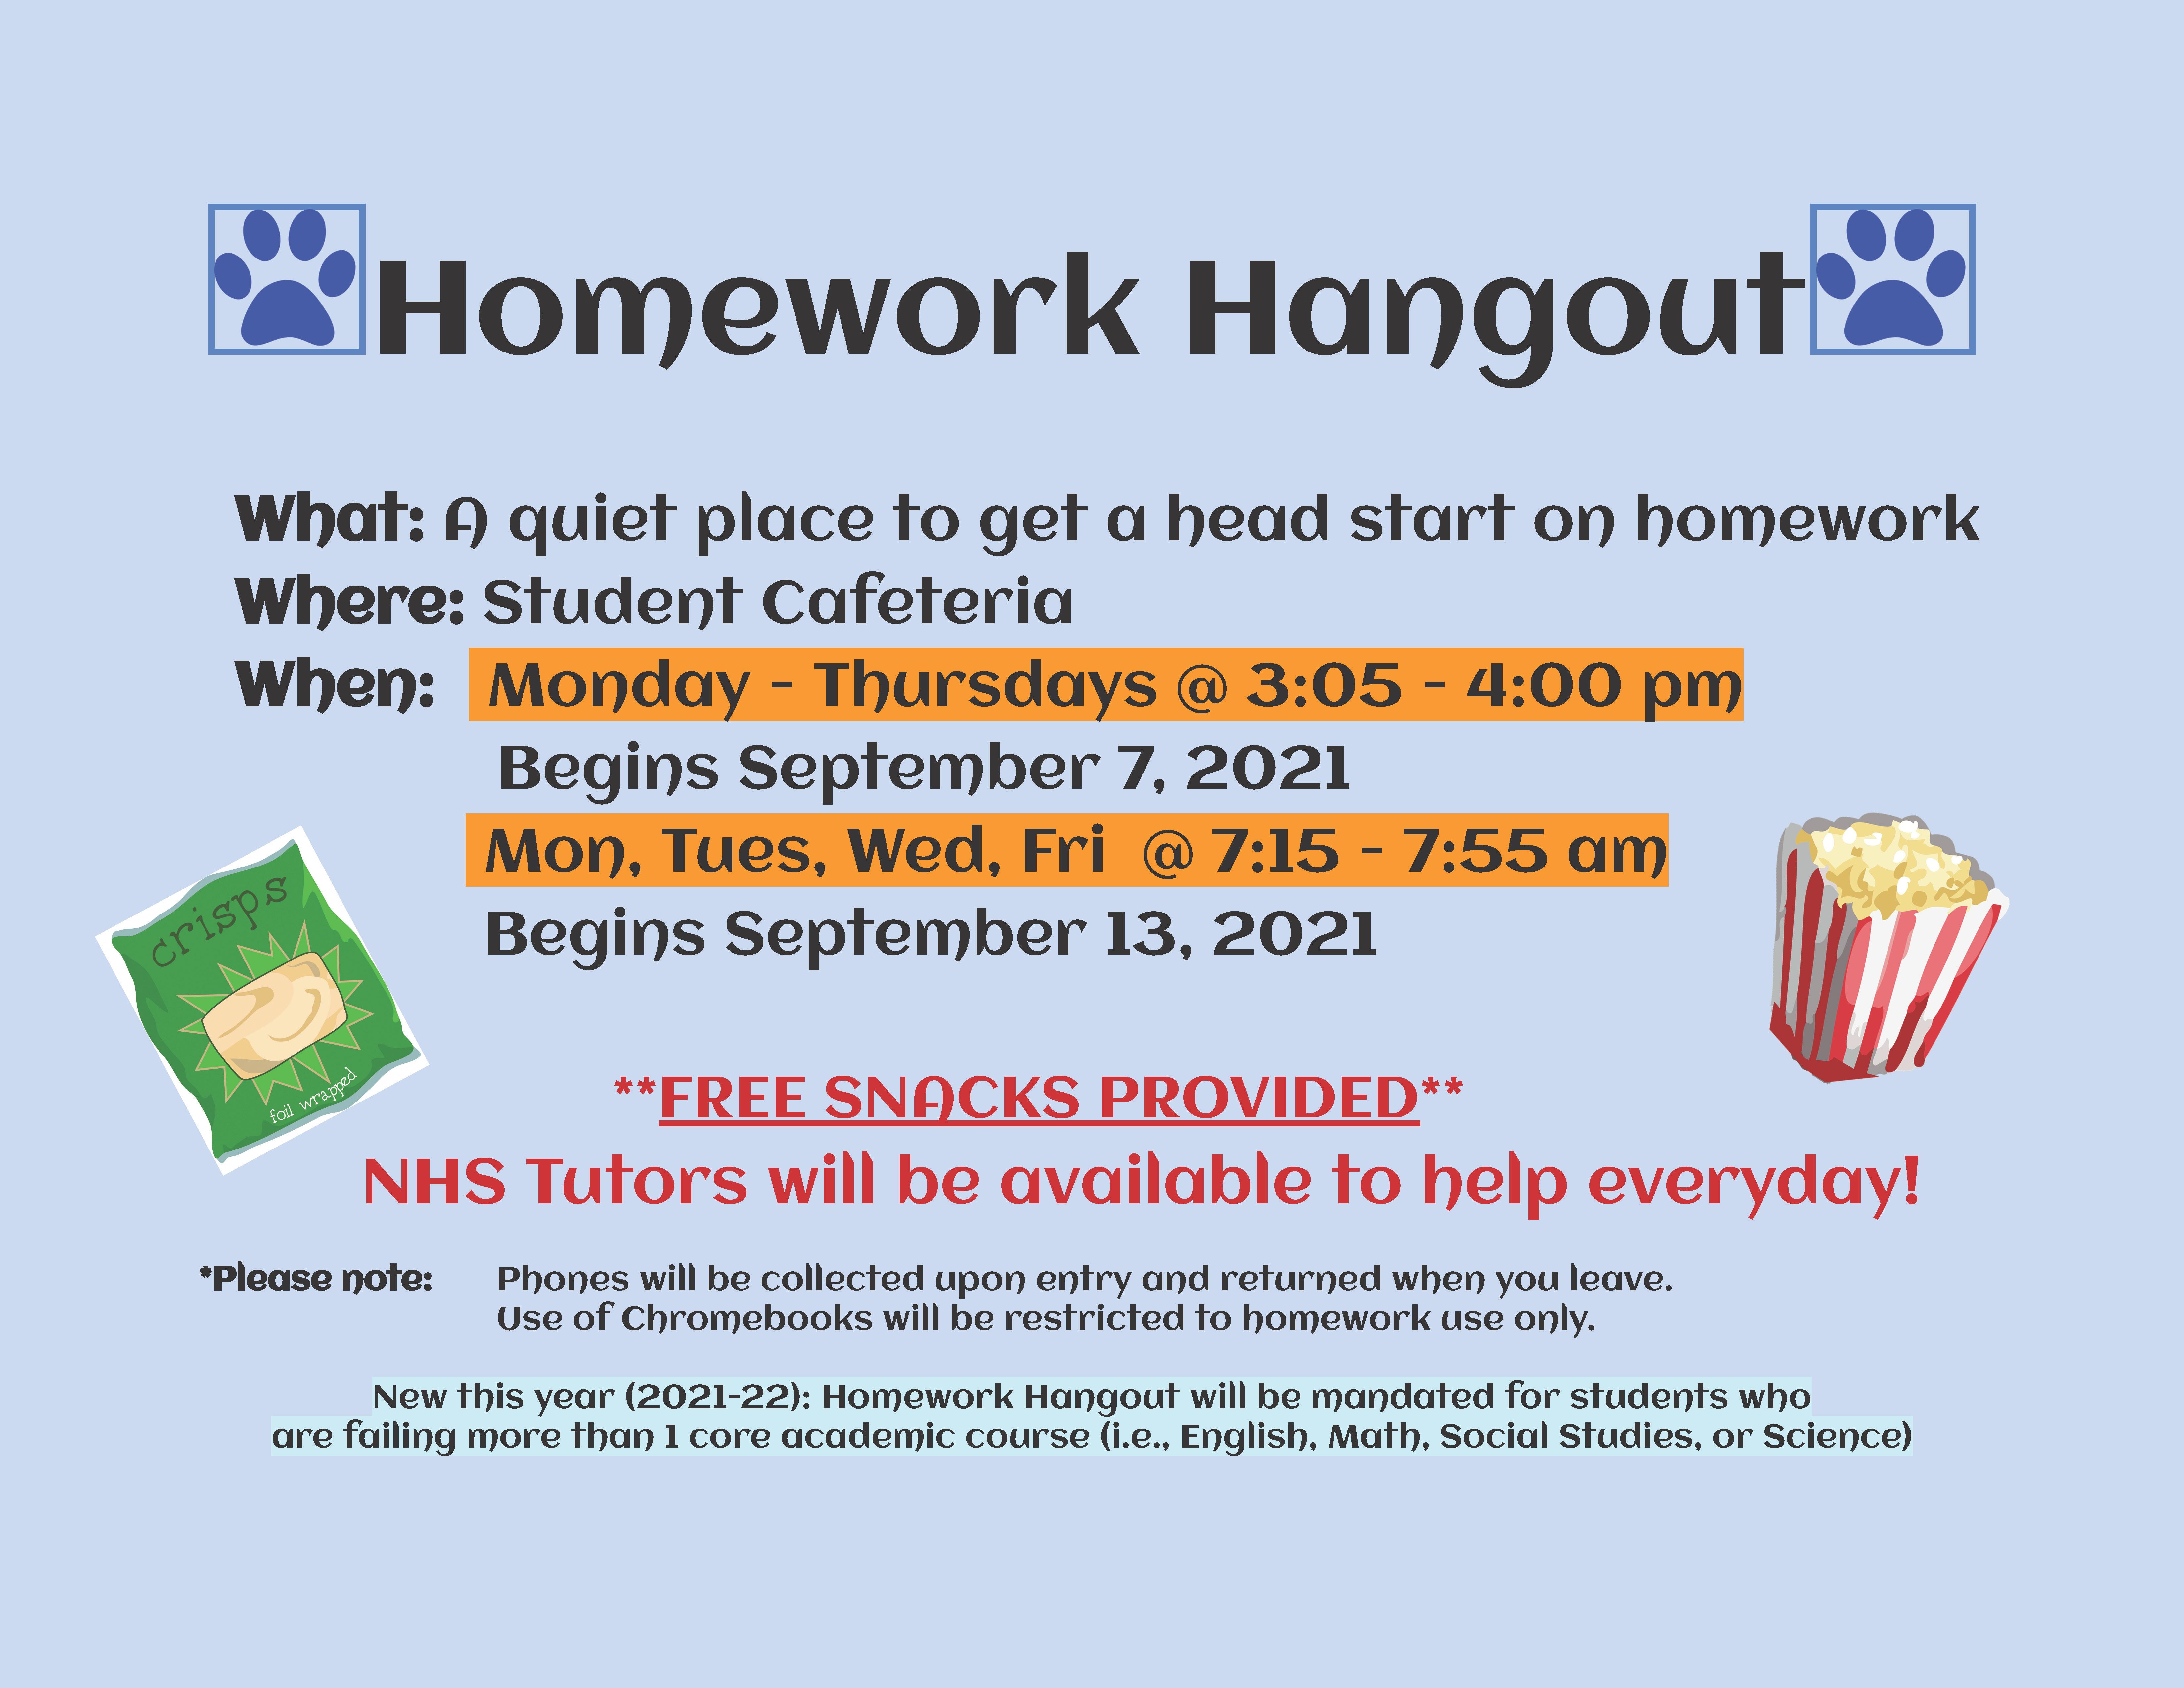 Homework Hangout - AM and PM hours